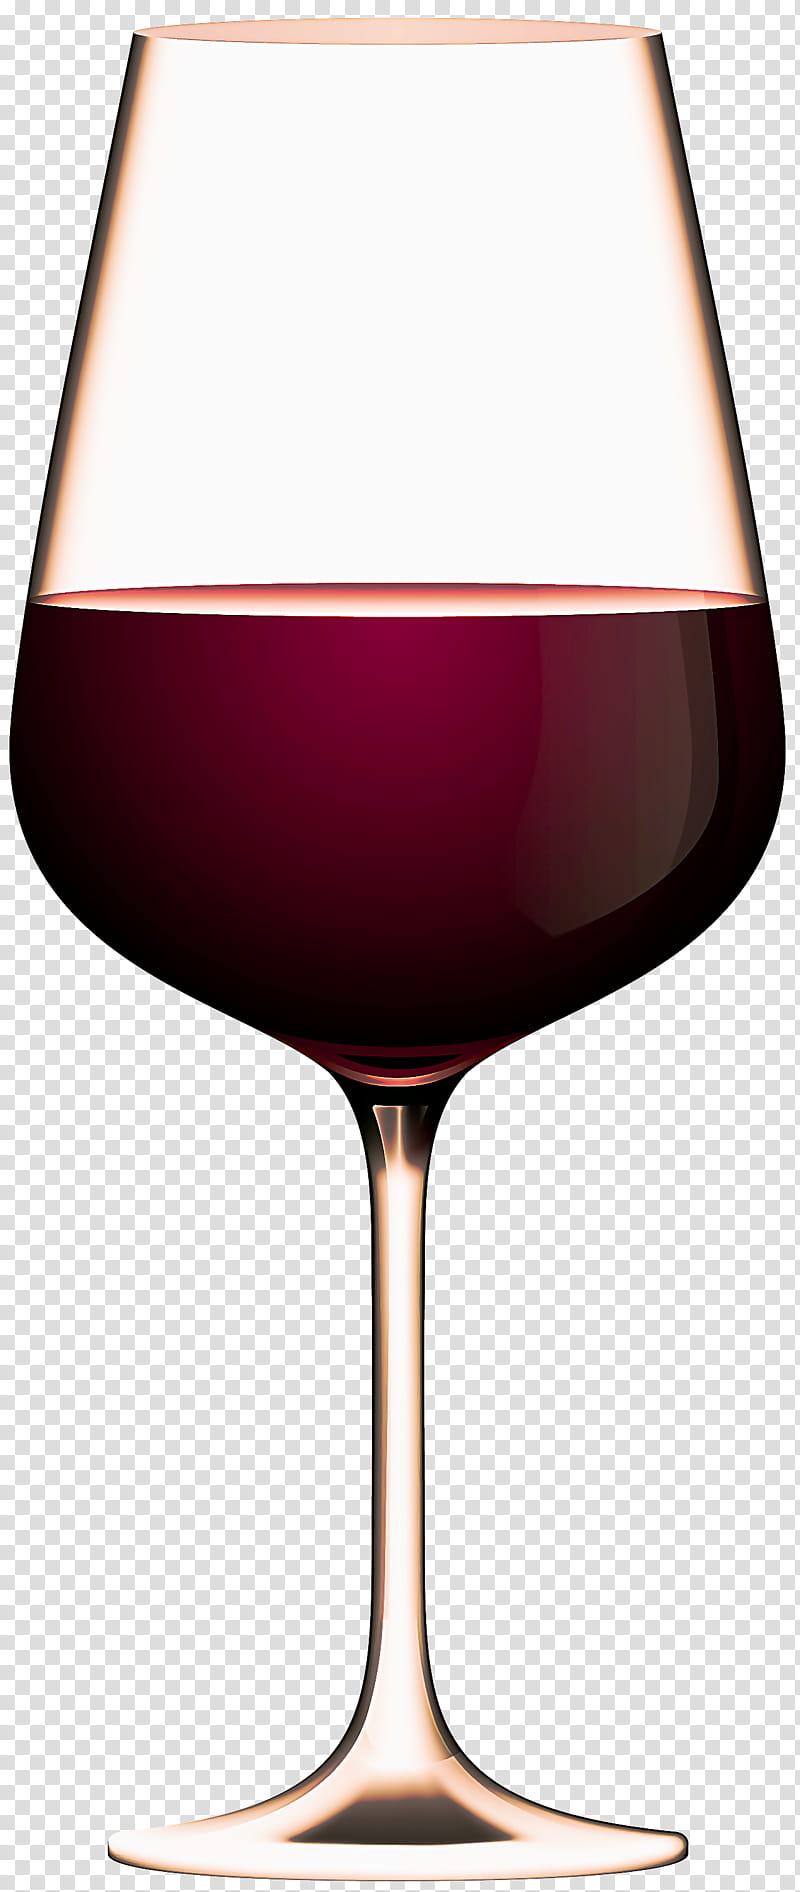 Wine glass, Stemware, Drinkware, Red Wine, Champagne Stemware, Alcohol, Snifter, Bottle transparent background PNG clipart